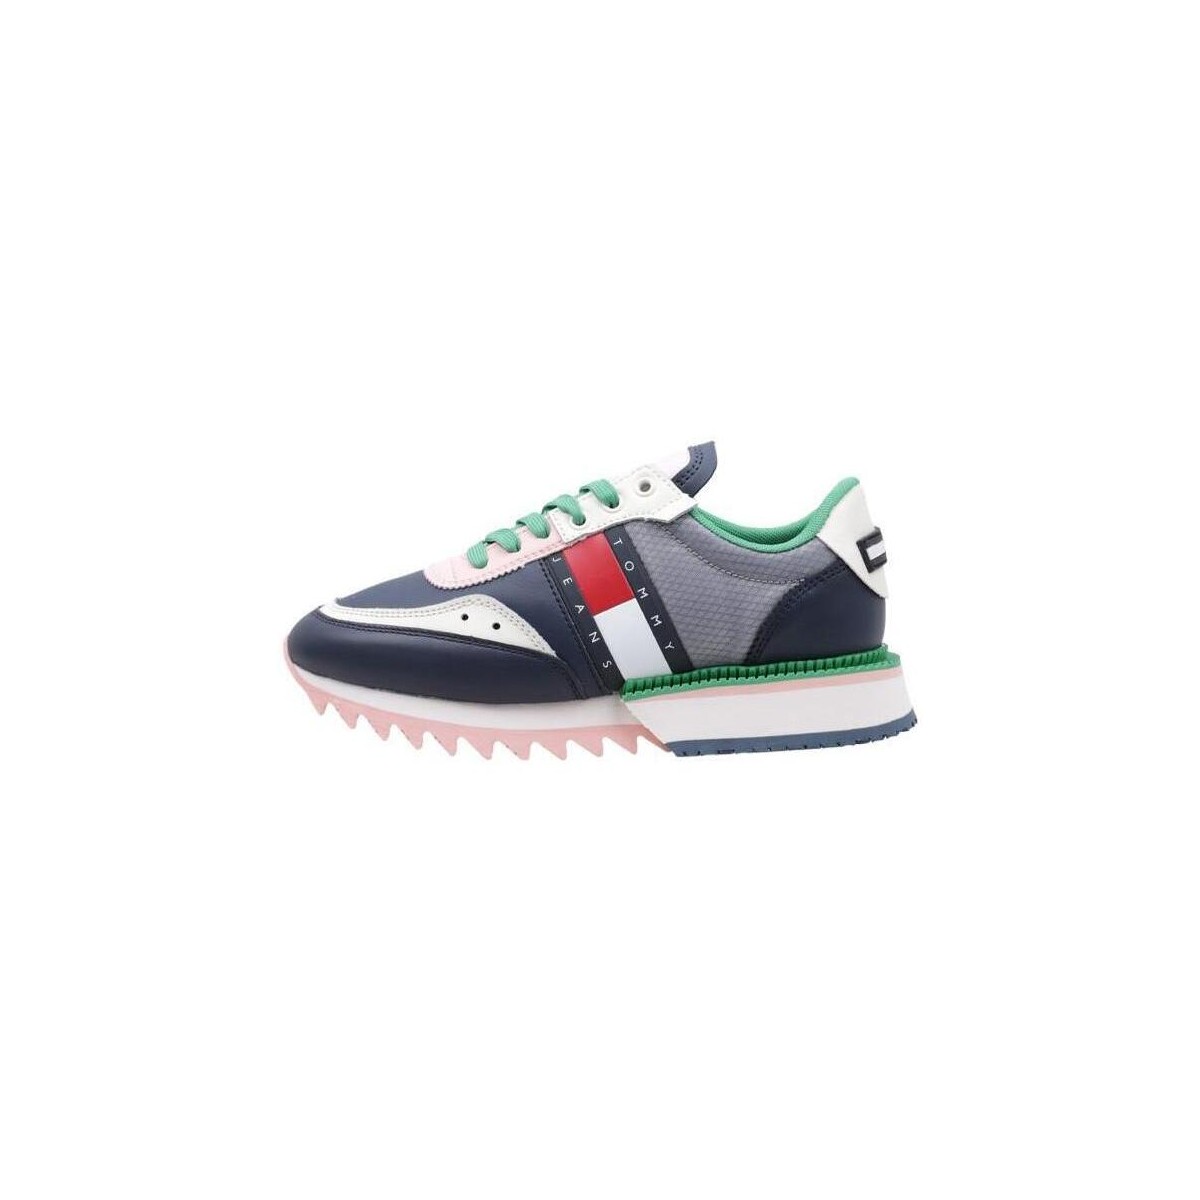 Schoenen Dames Lage sneakers Tommy Hilfiger TOMMY JEANS CLEATED WMN Blauw